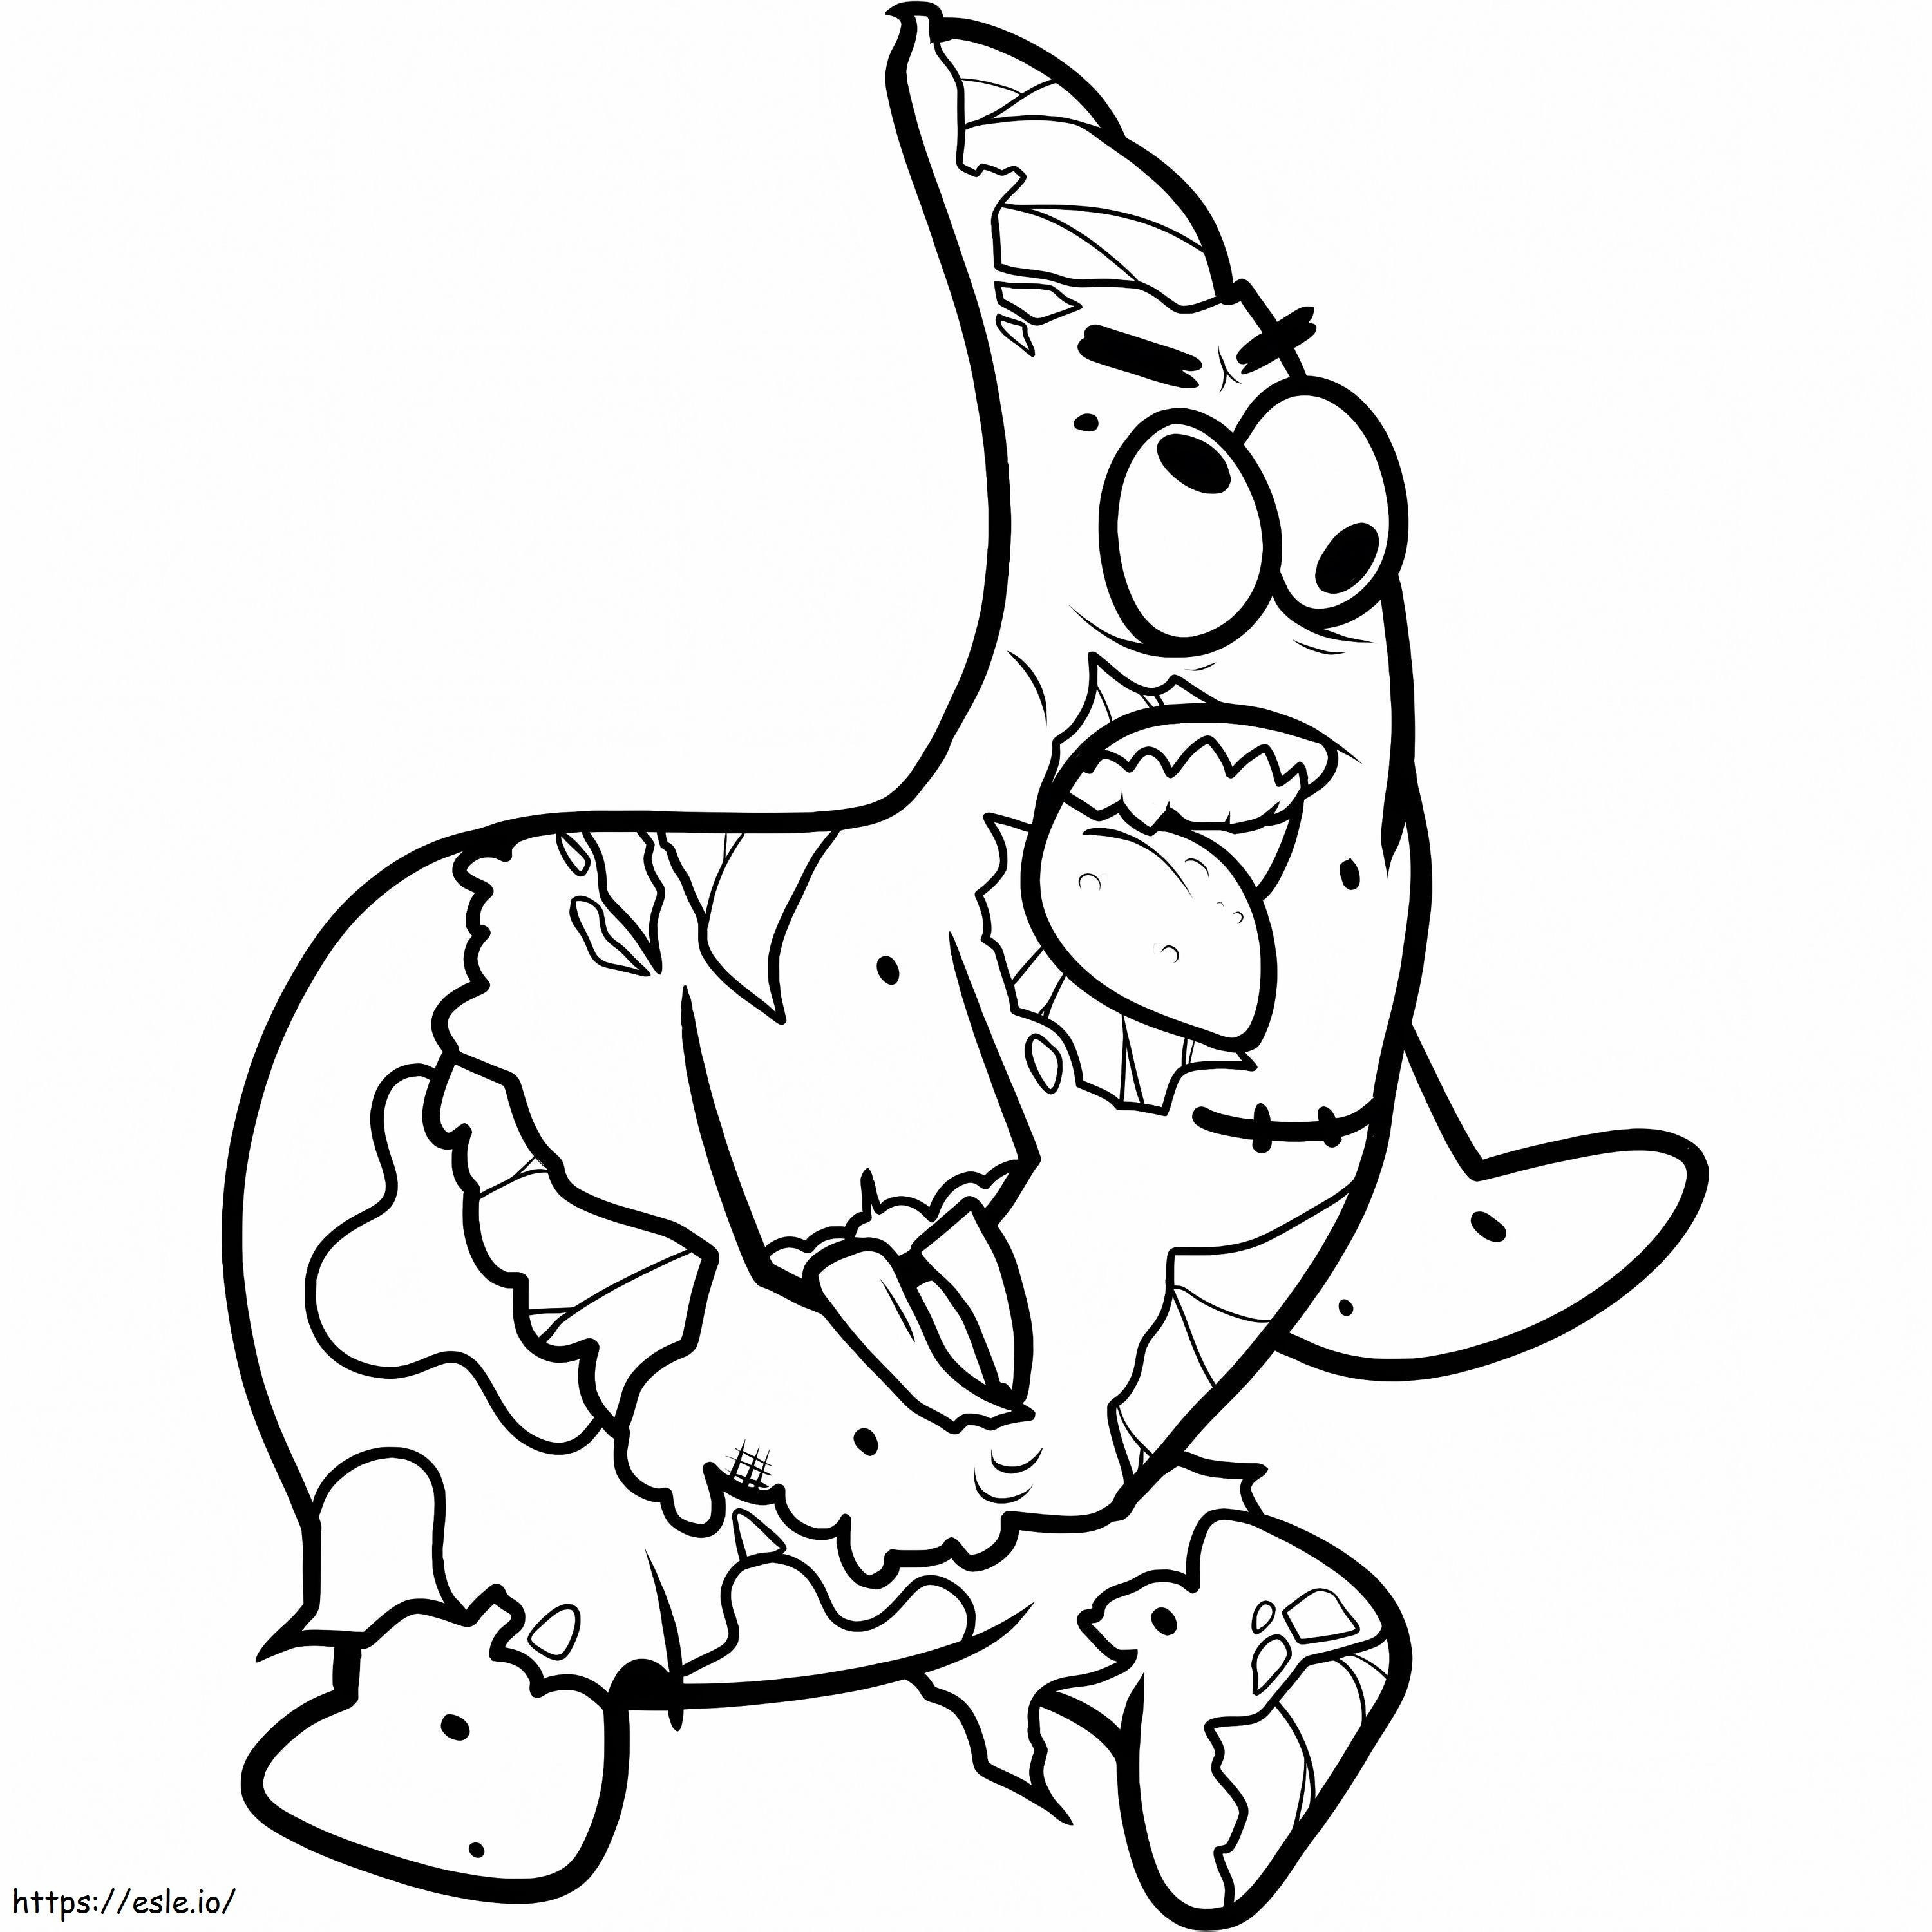 Patrick Star Zombie coloring page